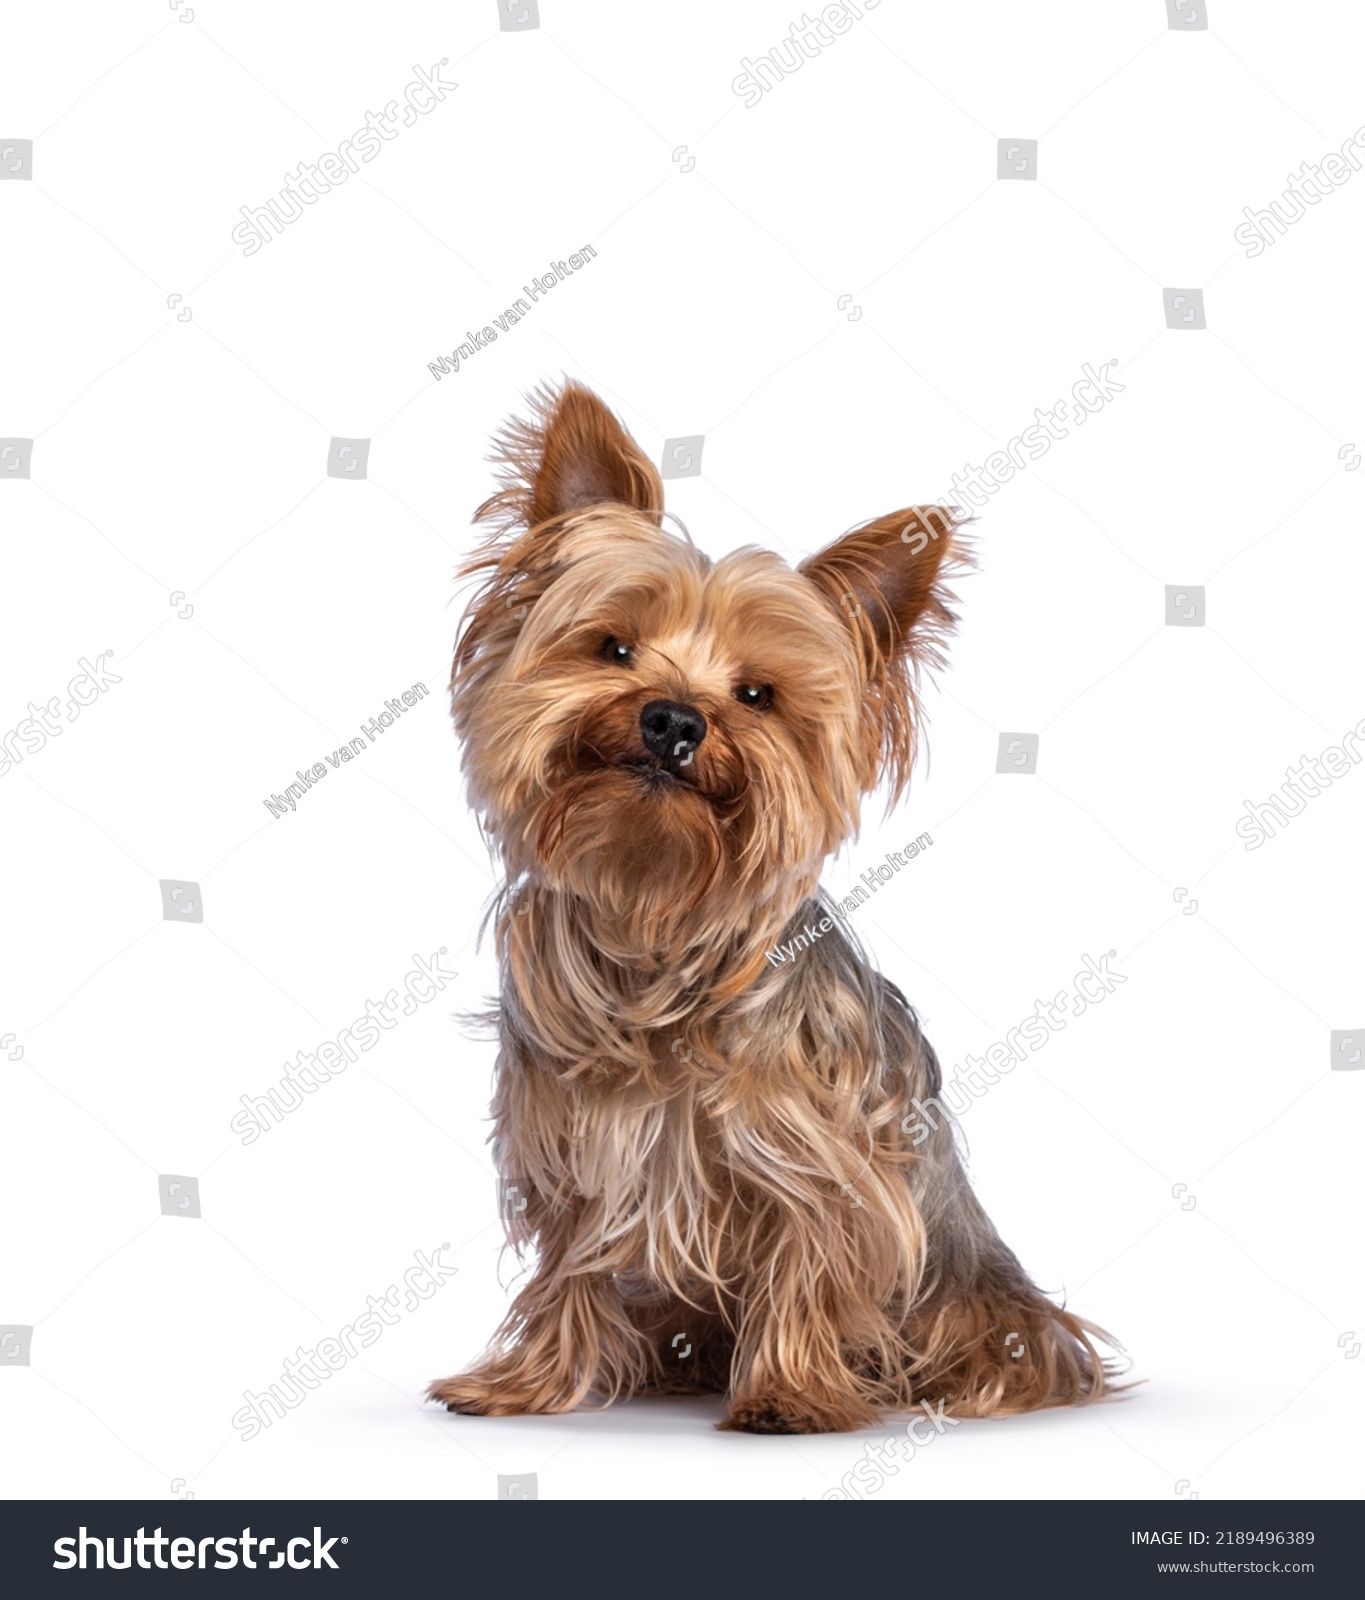 Scruffy adult blue gold Yorkshire terrier dog, sitting up facing front Looking towards camera and smiling. Isolated on a white background. #2189496389